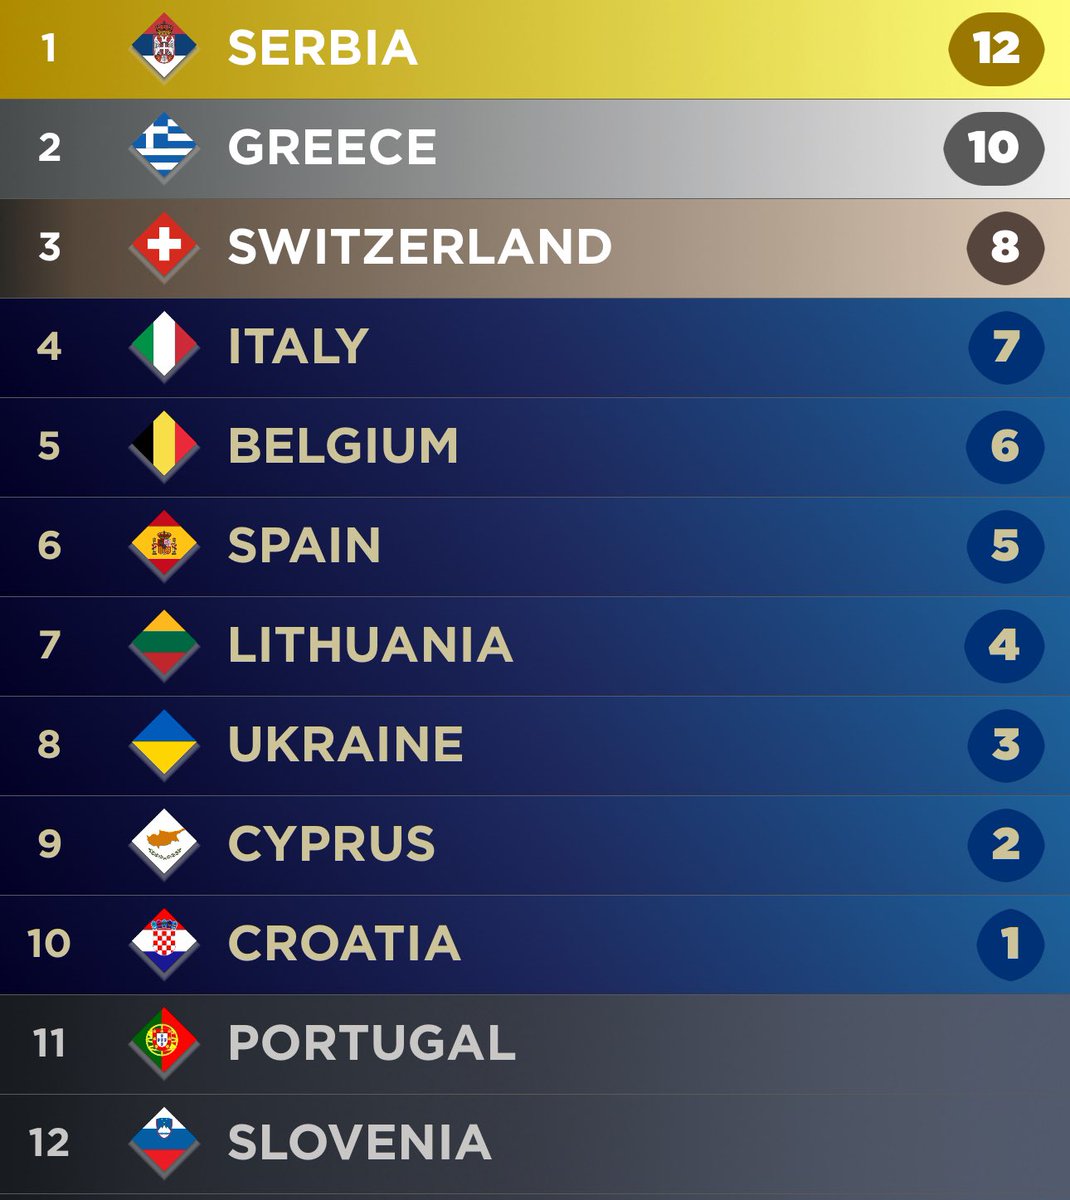 After the first rehearsals, my biggest grower is Greece. If not Serbia, then Greece for the win! ❤️ #Eurovision